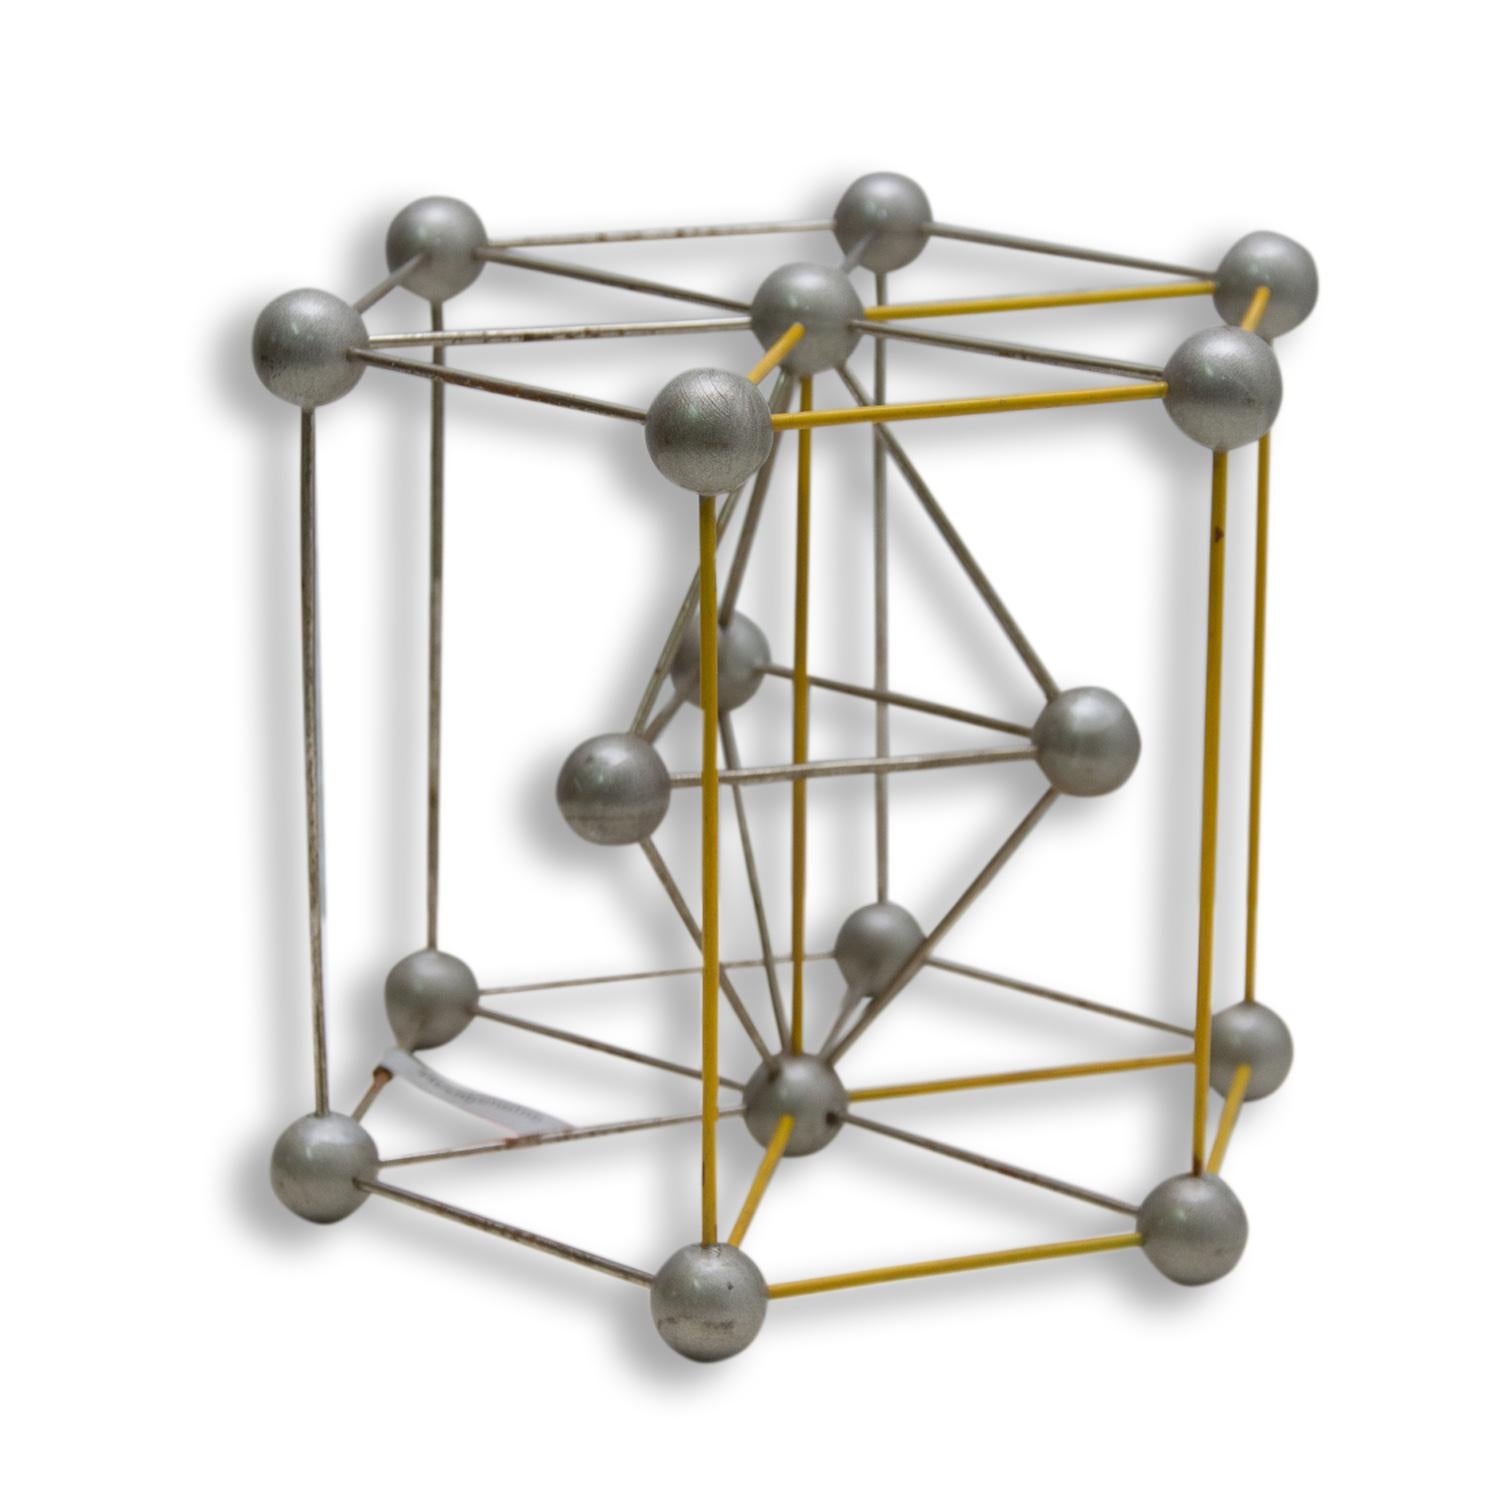 Vintage chemistry model of a Graphite Crystal

This beautiful metal 1950s molecular structure was used in a school in Prague (Czech Republic) in the 1950s and 1960s.

This is an authentic vintage item with great character and